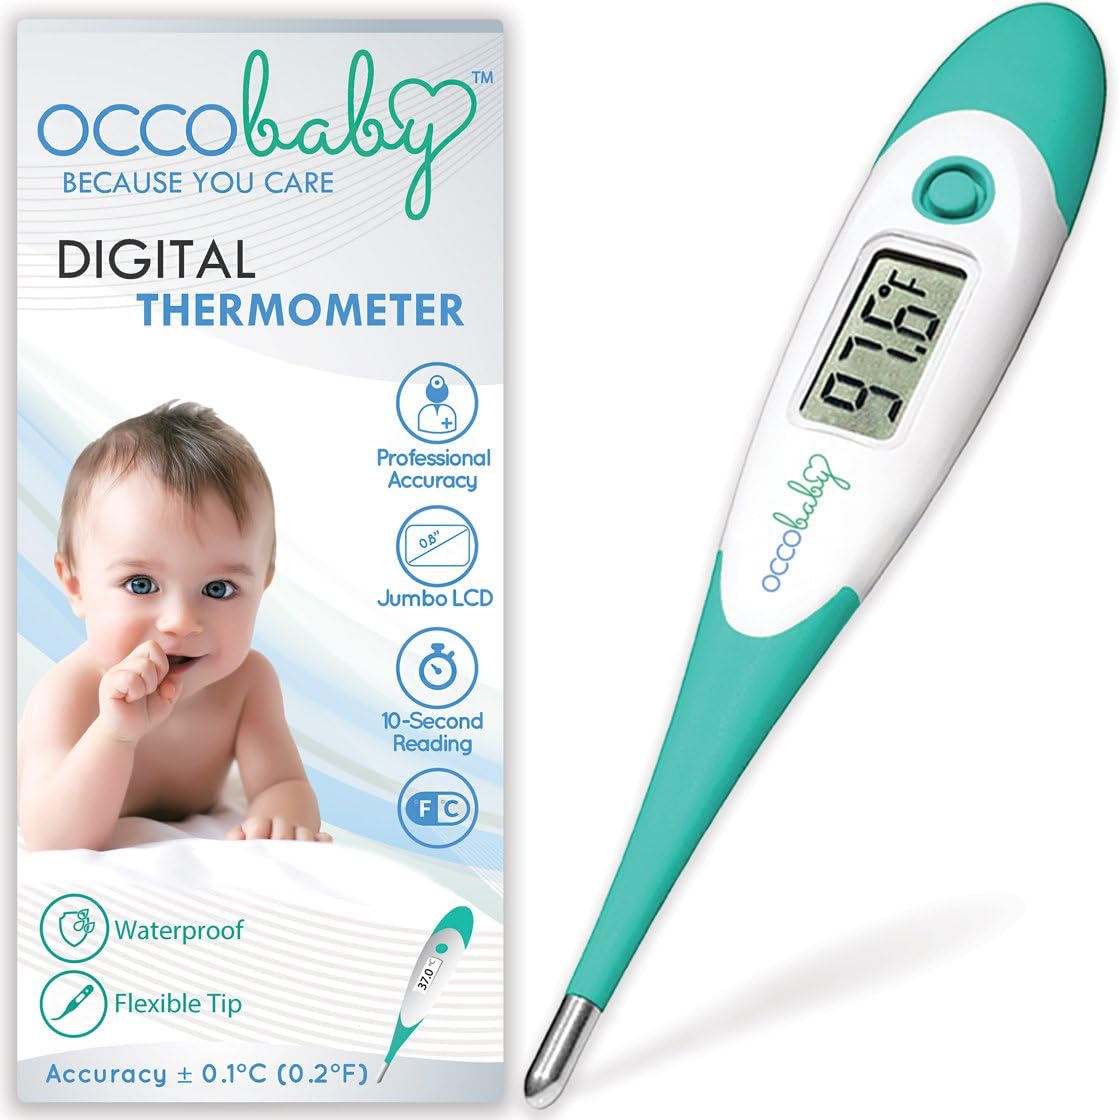 OCCObaby Clinical Digital Baby Thermometer - LCD, [...]